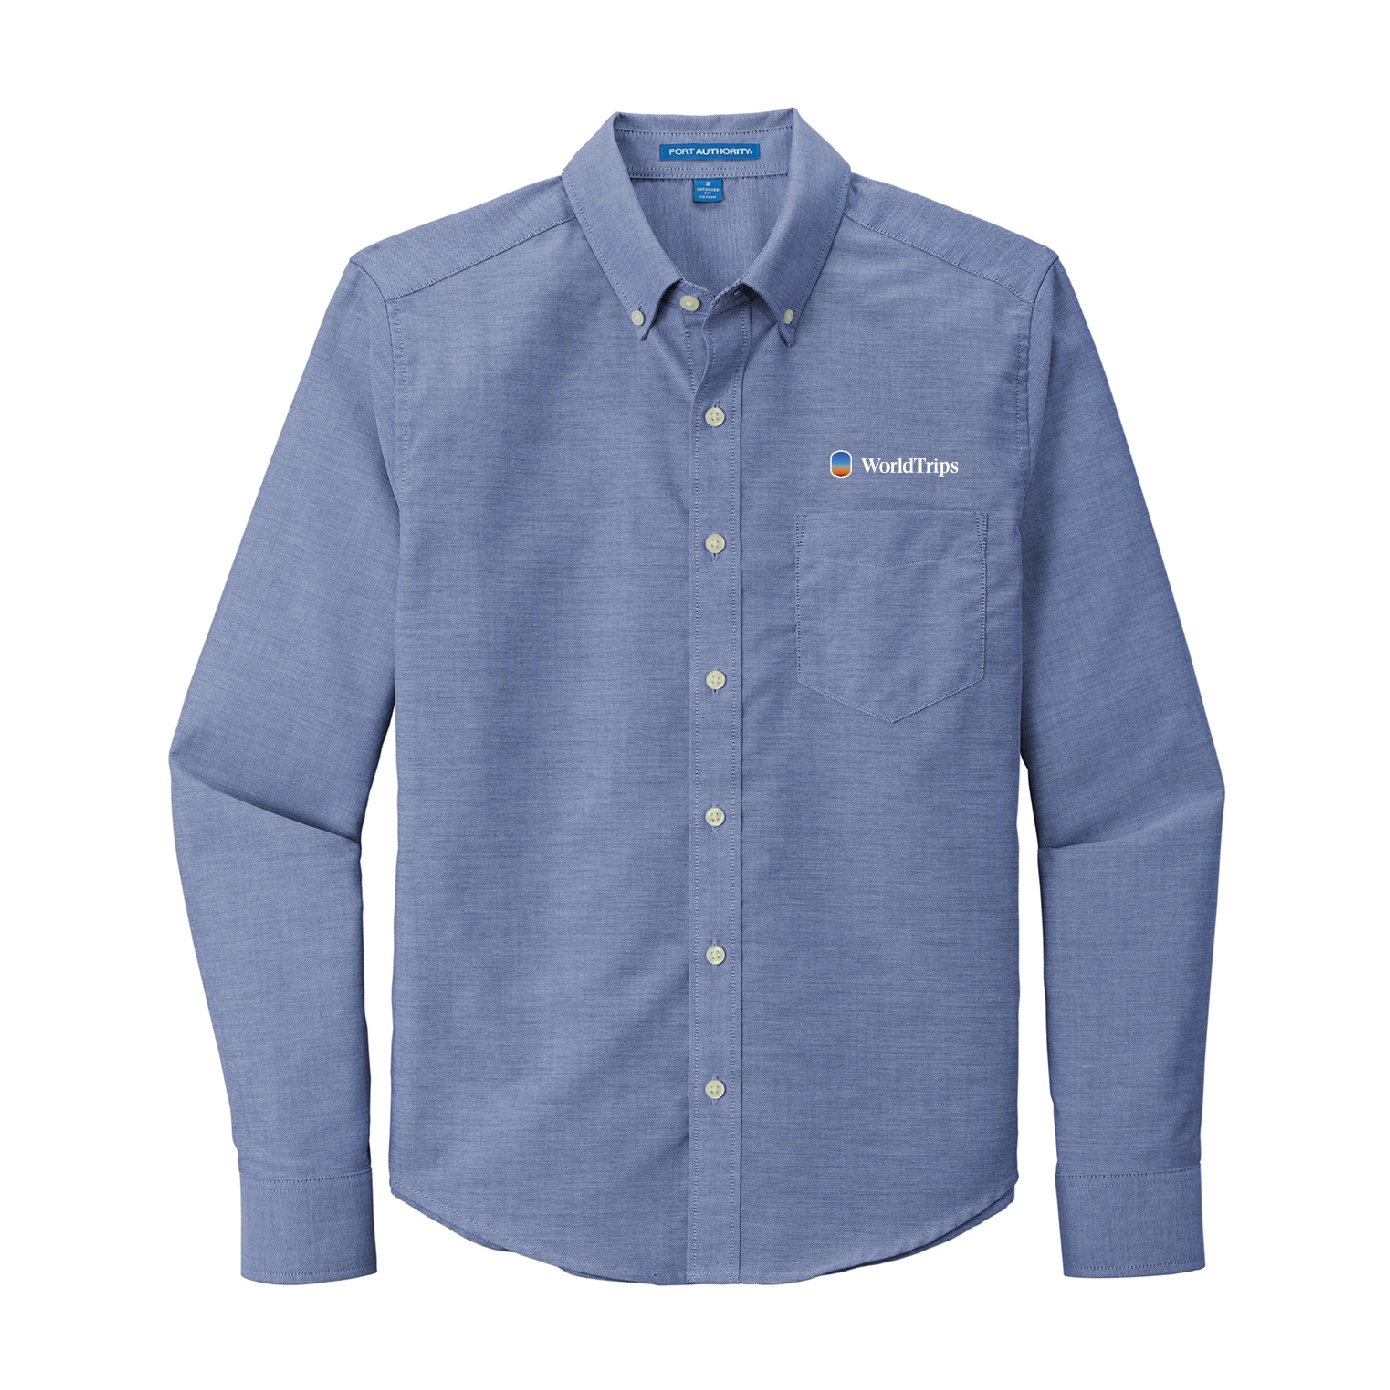 Port Authority Untucked Fit SuperPro Oxford Shirt